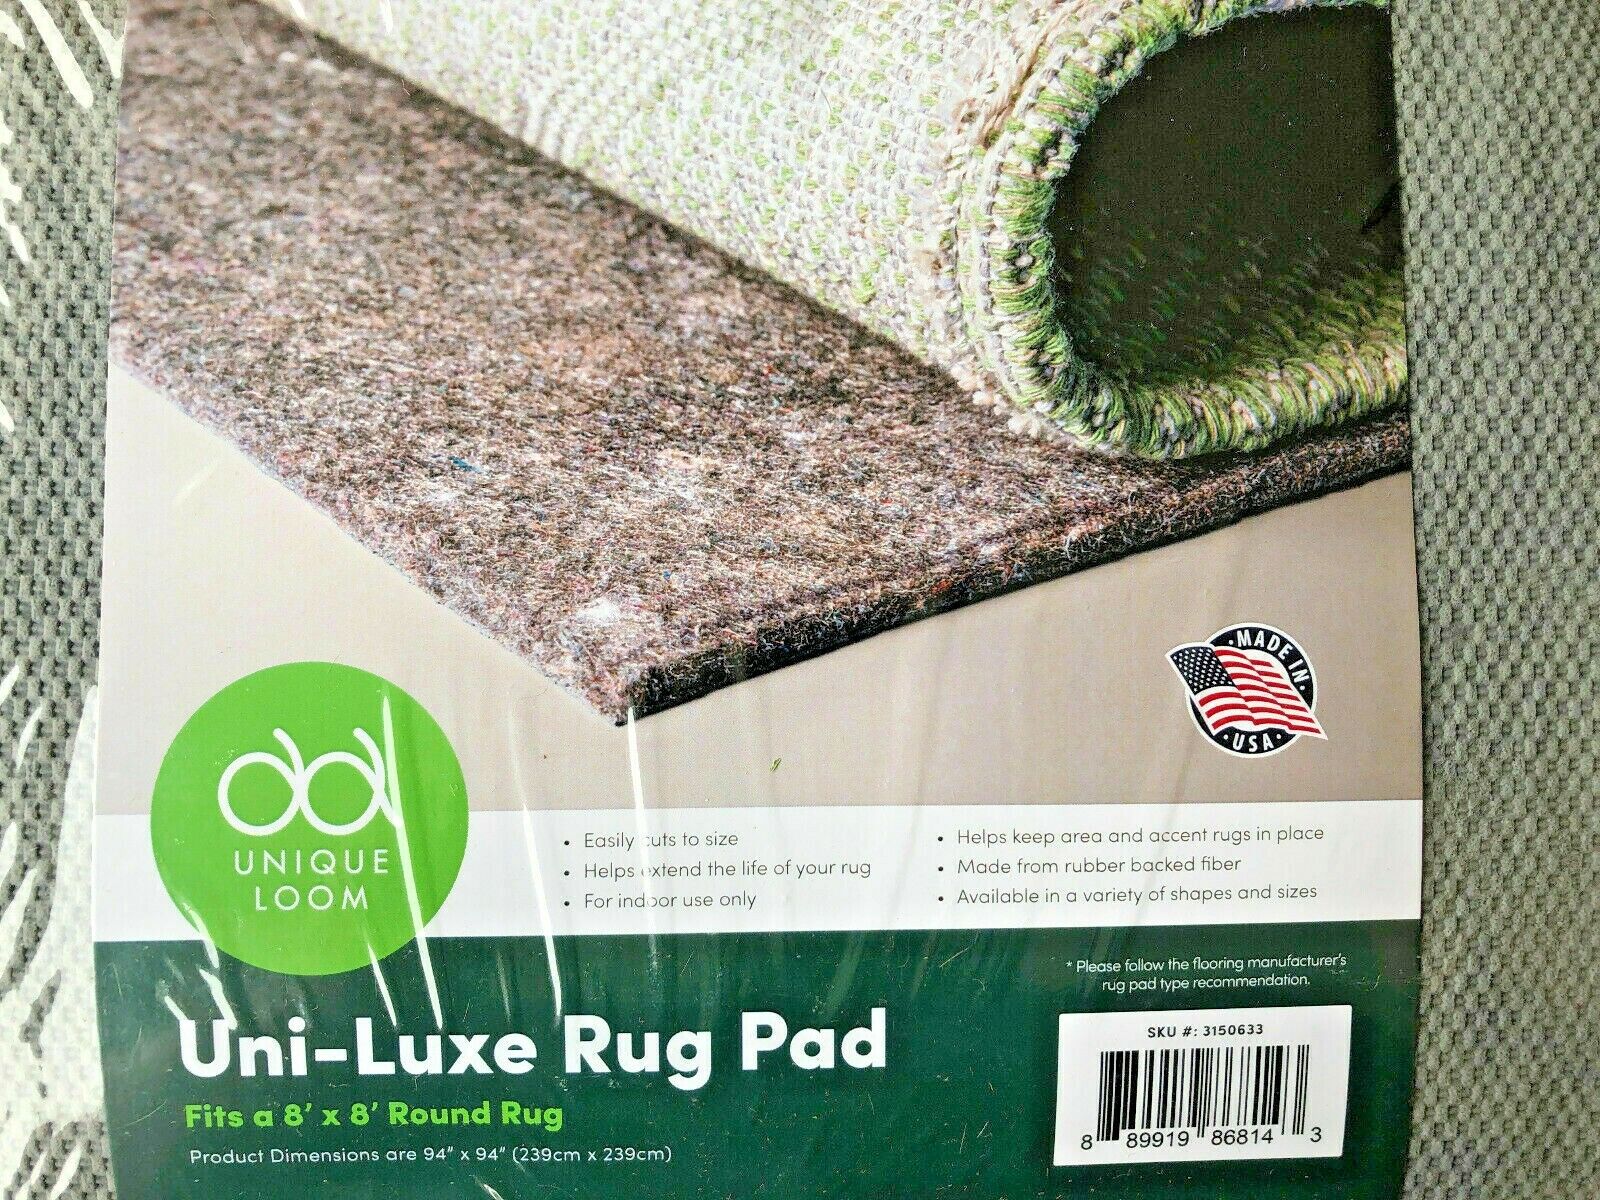 Uni-Luxe 8 inch Round Rug Pad- Brand New-Sealed In Original packaging